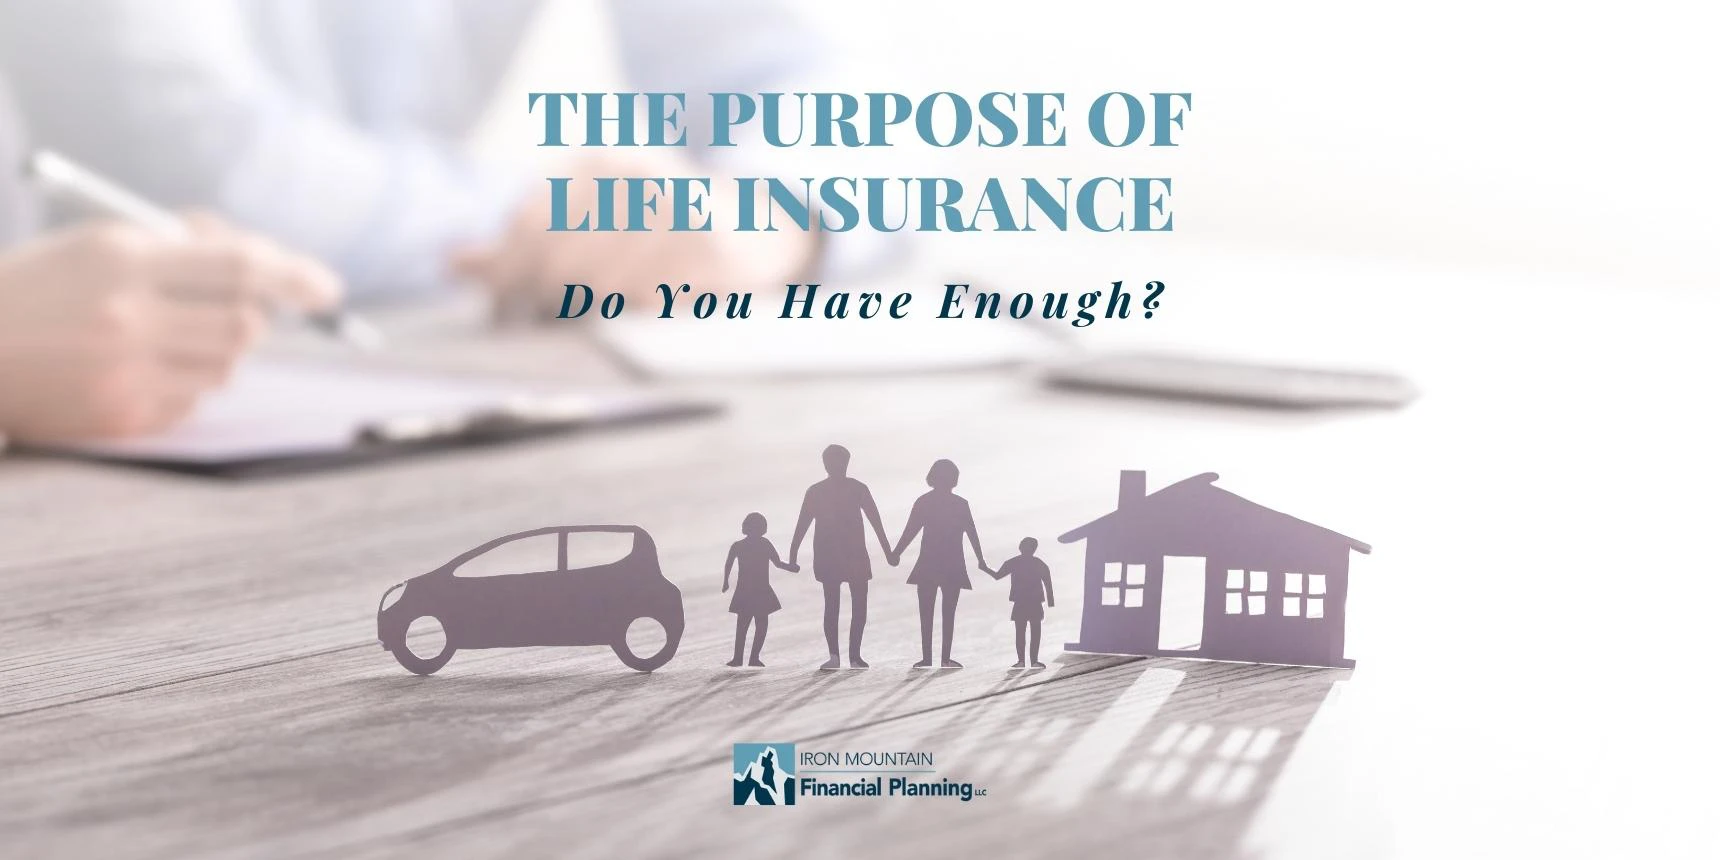 The Purpose of Life Insurance and Do you have enough?